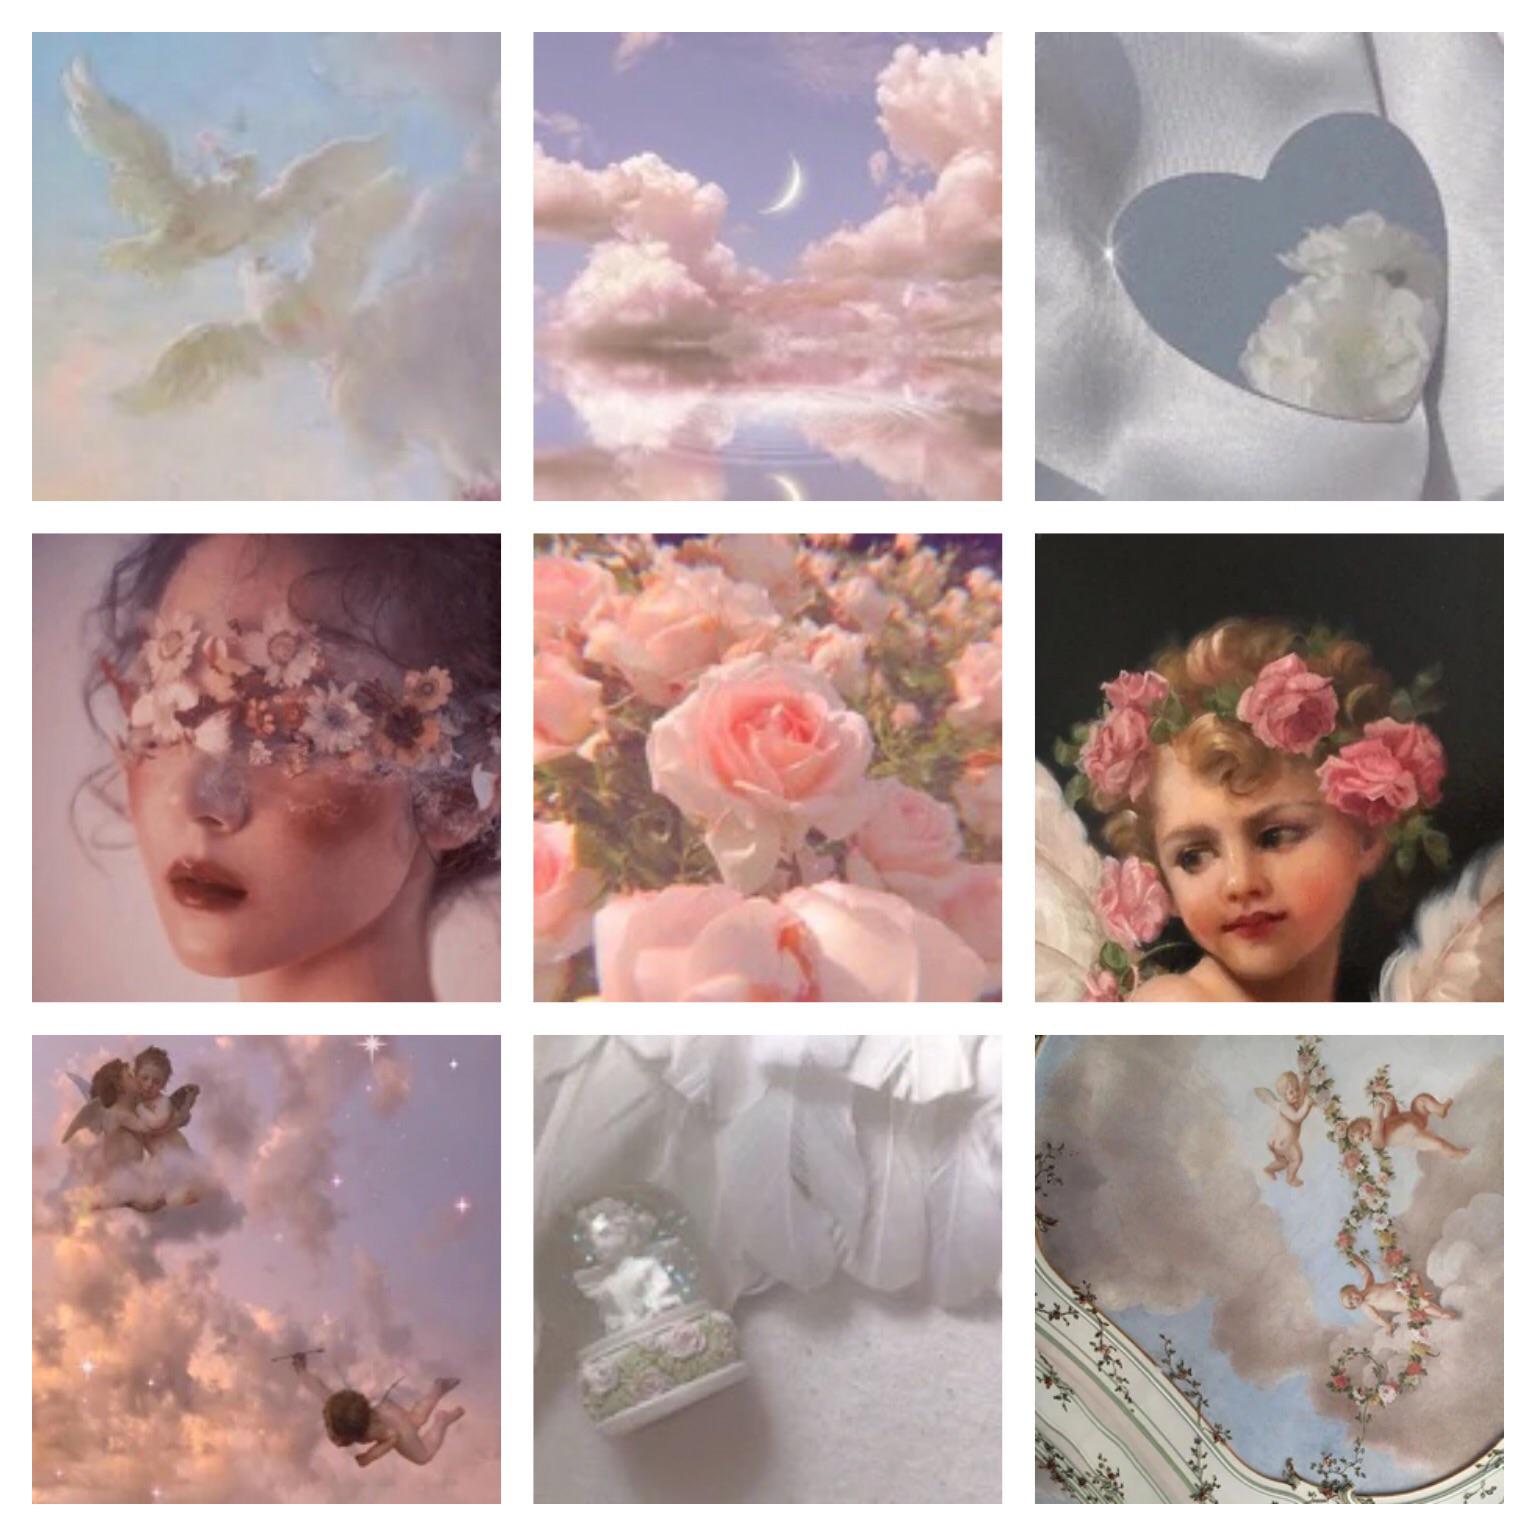 Angelcore aims to depict the unearthly beauty, tranquility, and purity of angels through doves, halos, and soft colours